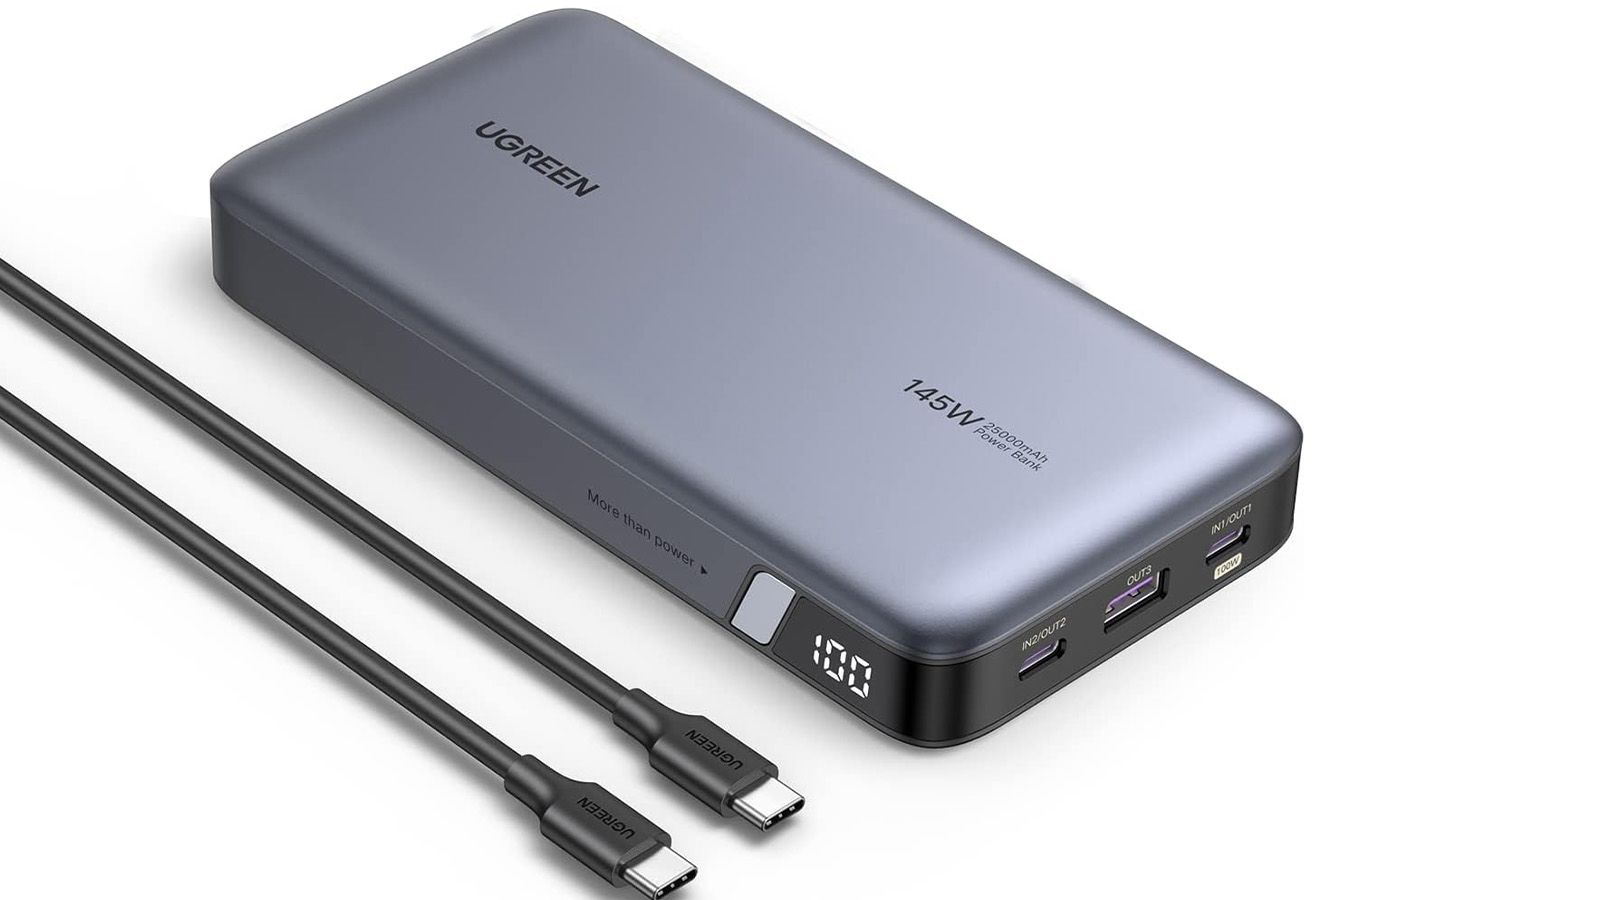 Anker Prime Power Bank 20000mAh 200W USB-C Portable Charger 3-Ports Battery  Pack, by Tech Wonders